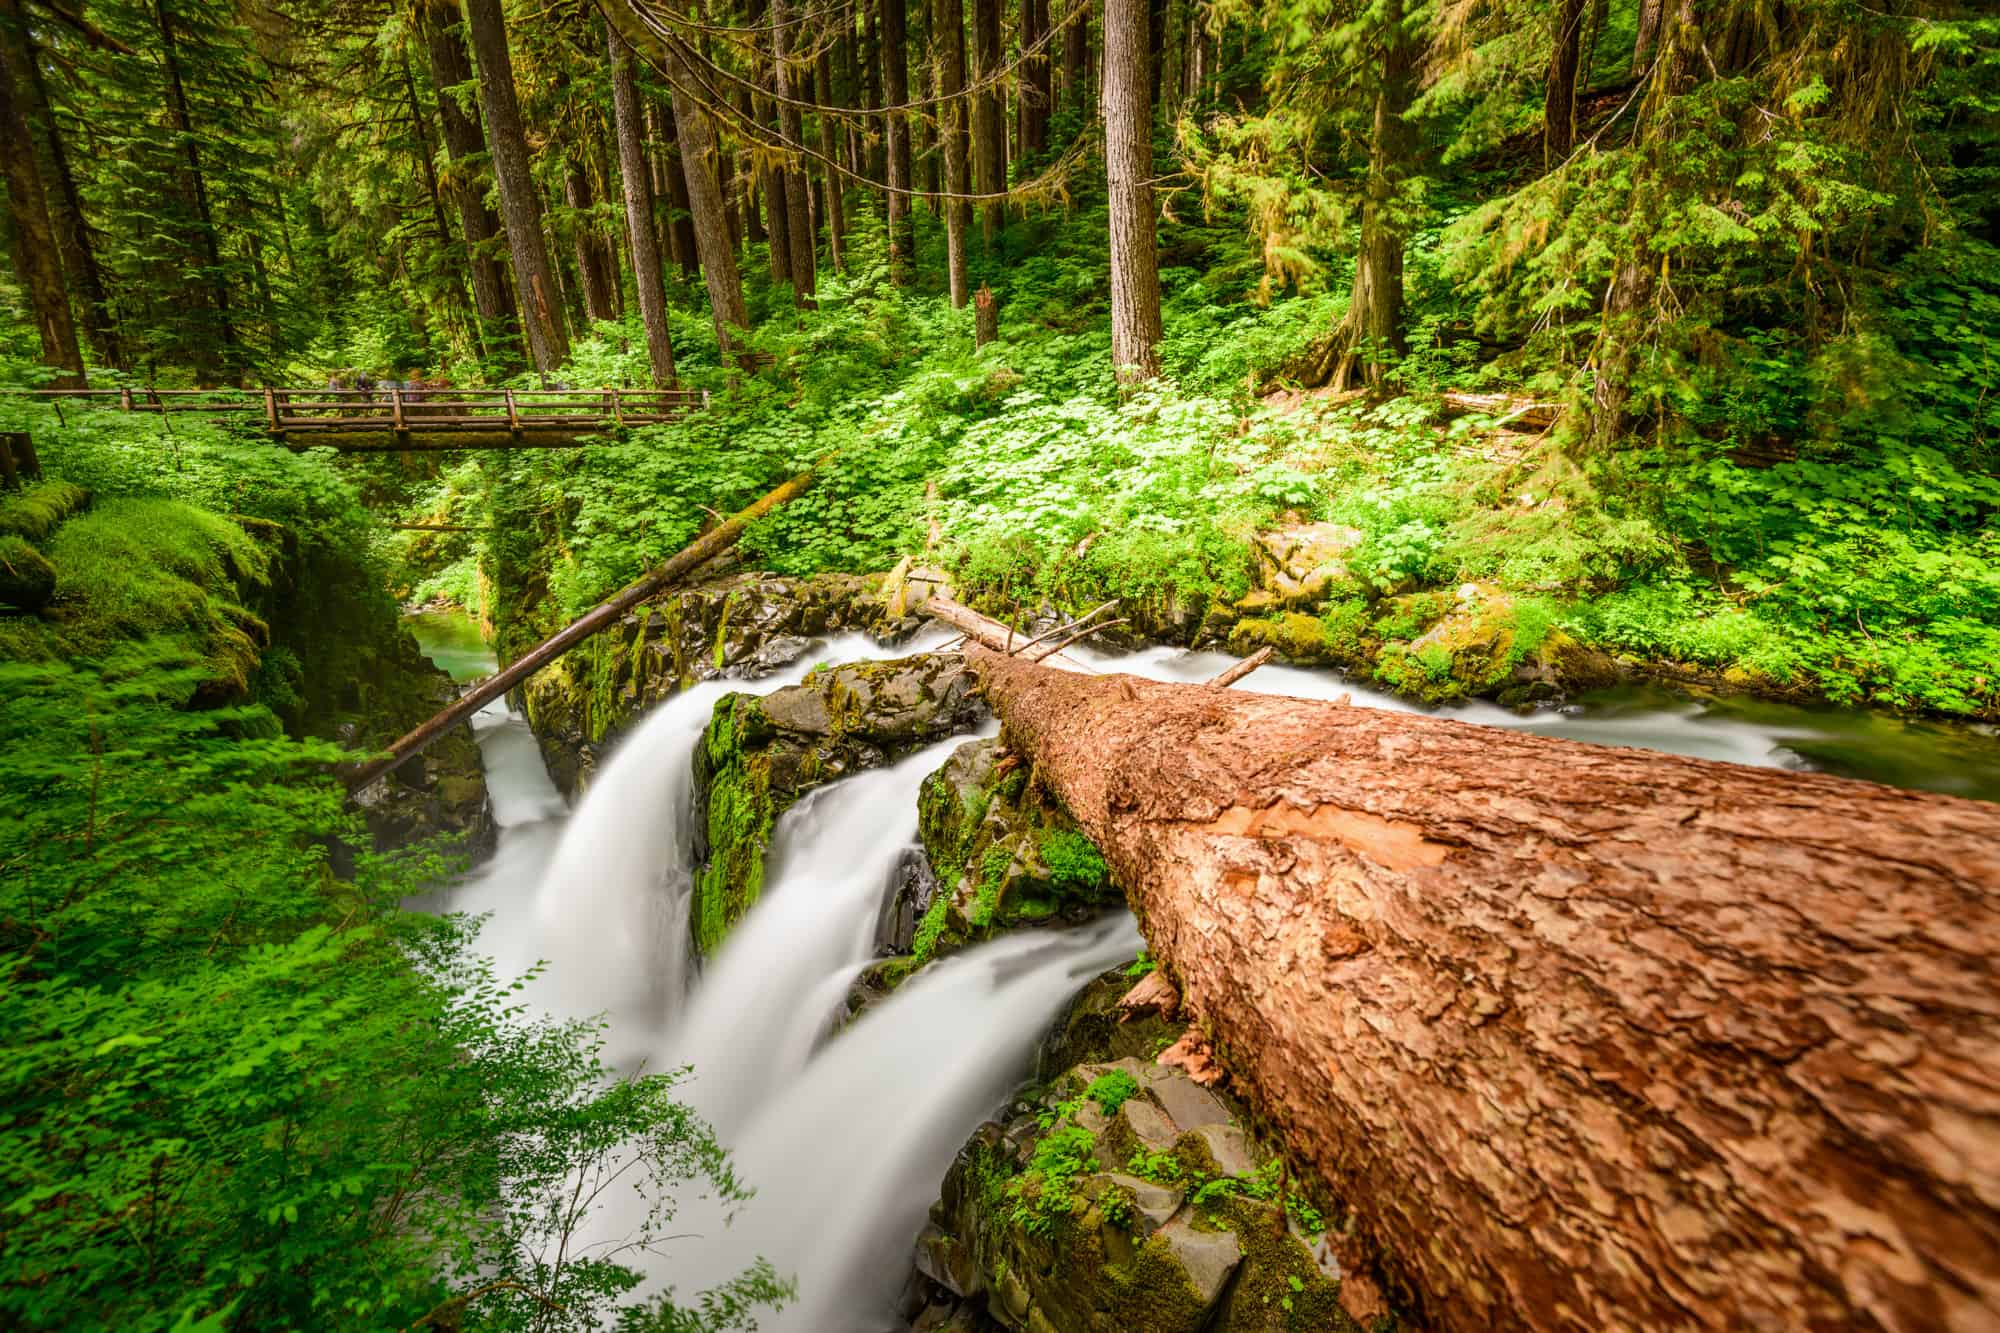 a log pulls your eye from right to left to the waterfall and bridge in the background surrounded by green forest, olympic national park tours take you into the rainforest